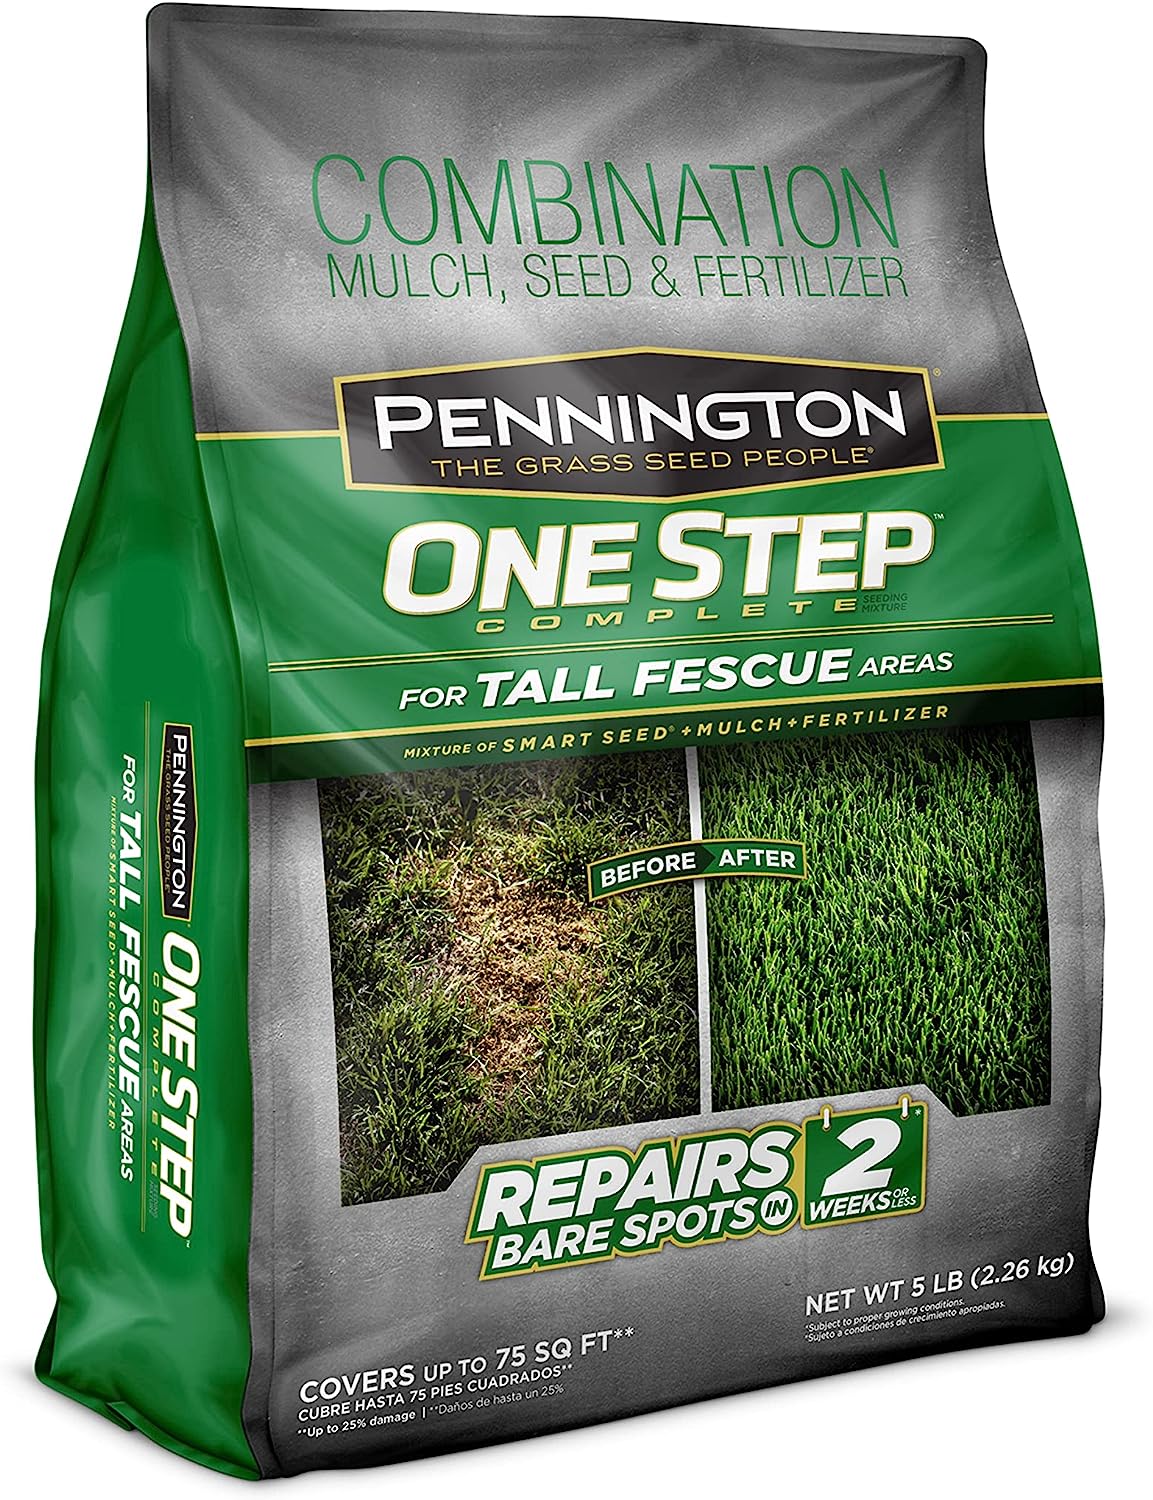 One Step Complete Tall Fescue 5lb. Grass Seed + Mulch [...]